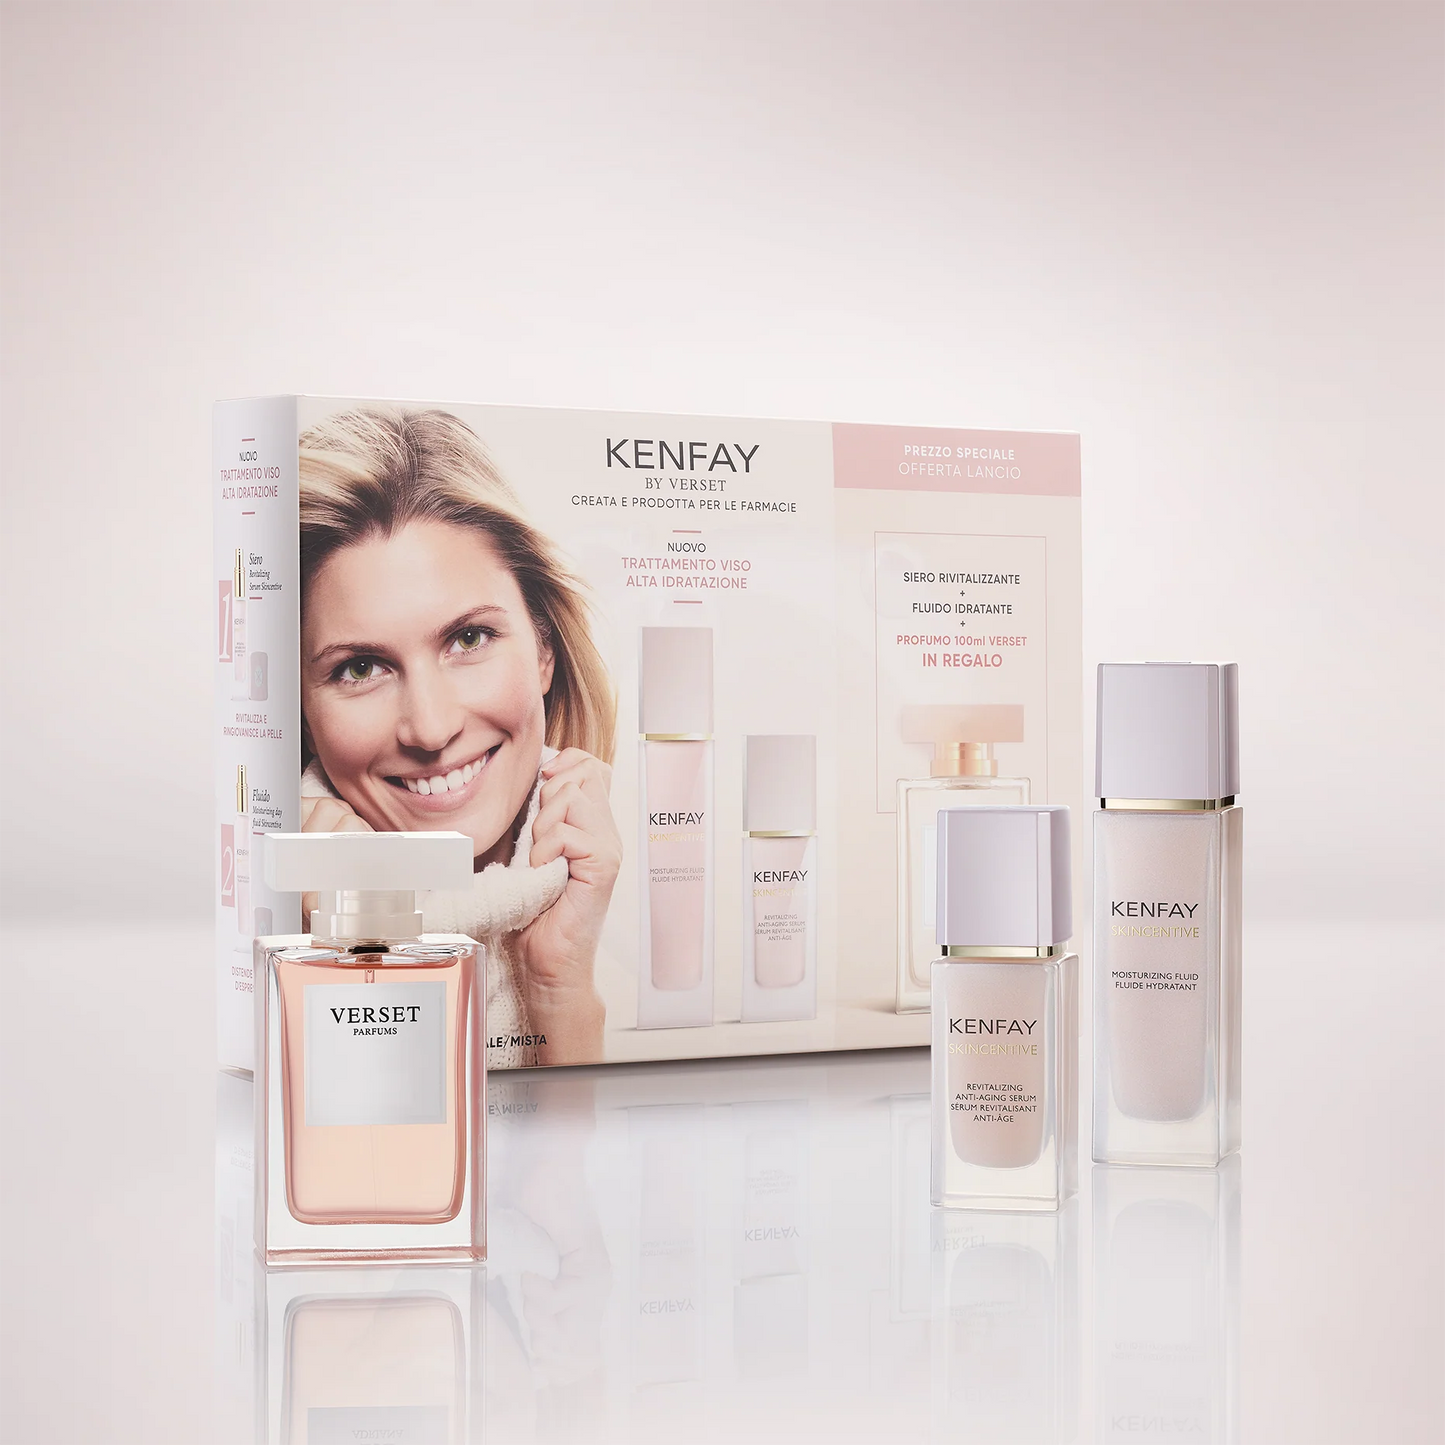 Kenfay and Verset Gift Box for Normal Oily Skin